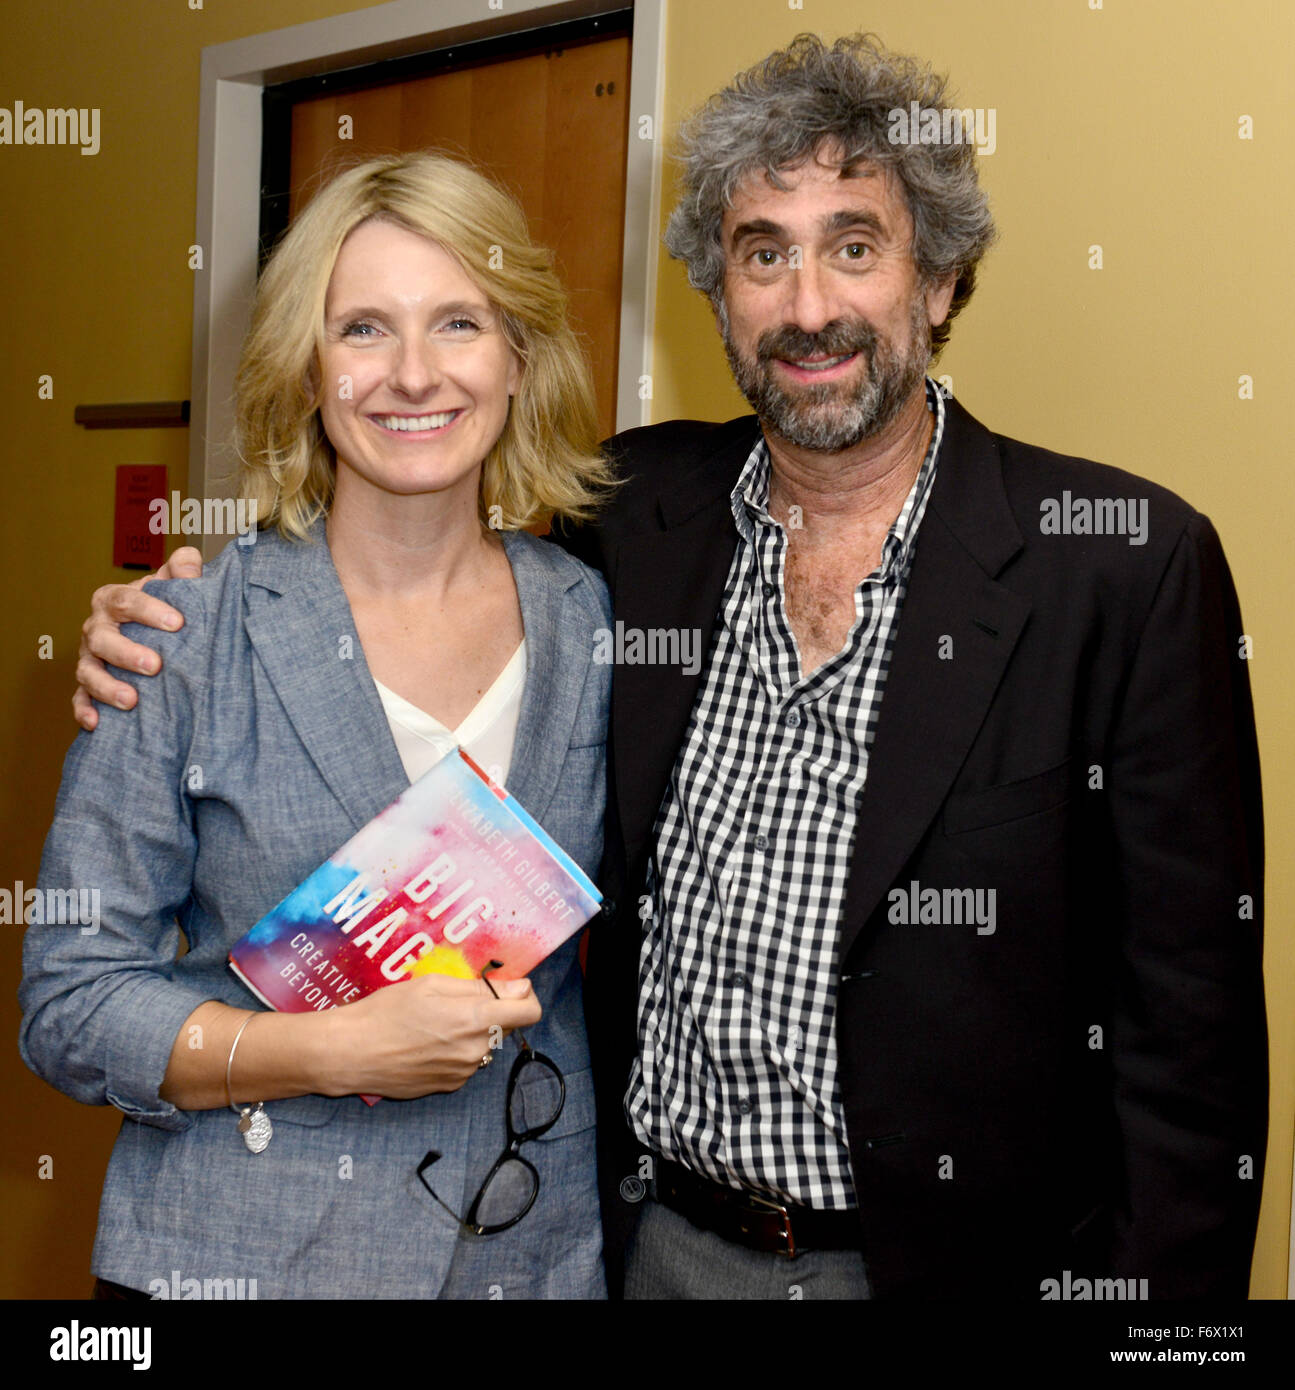 Eat Pray Love' author Elizabeth Gilbert speaks and reads from her new book  'Big Magic' presented by Books and Books at the James L Knight Concert Hall  at Adrienne Arsht Center Featuring: